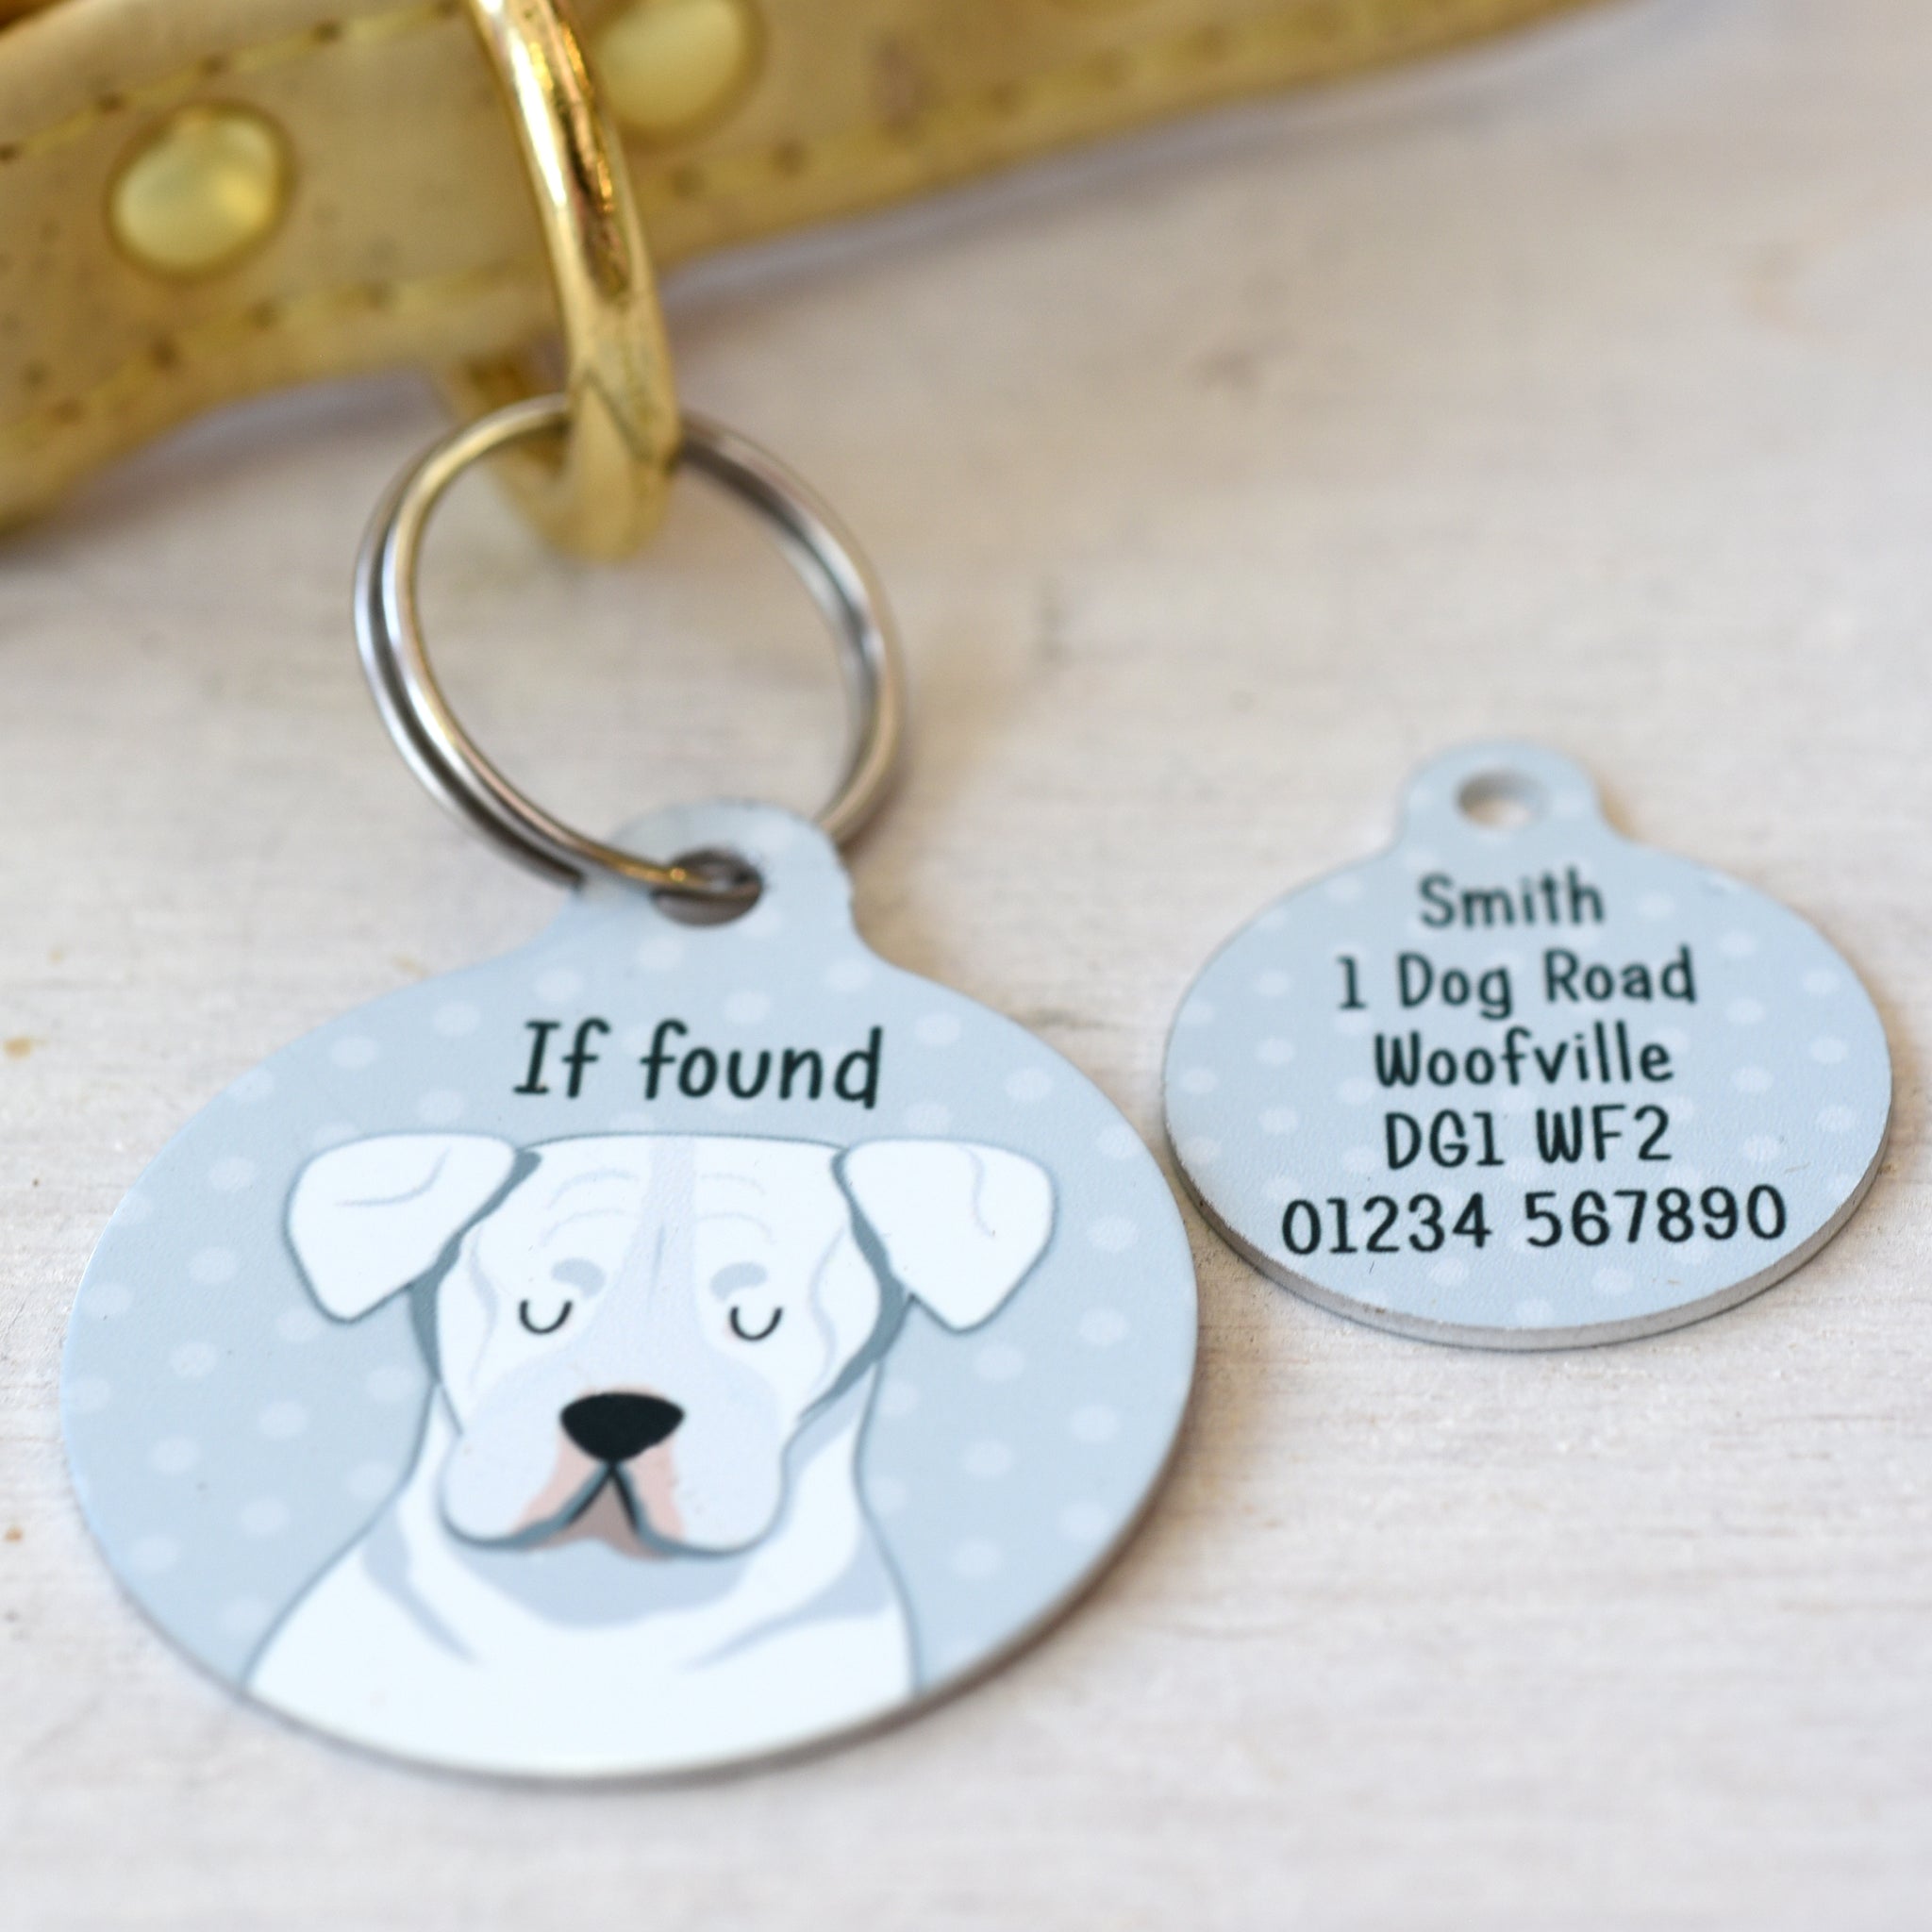 what are the best dog id tags